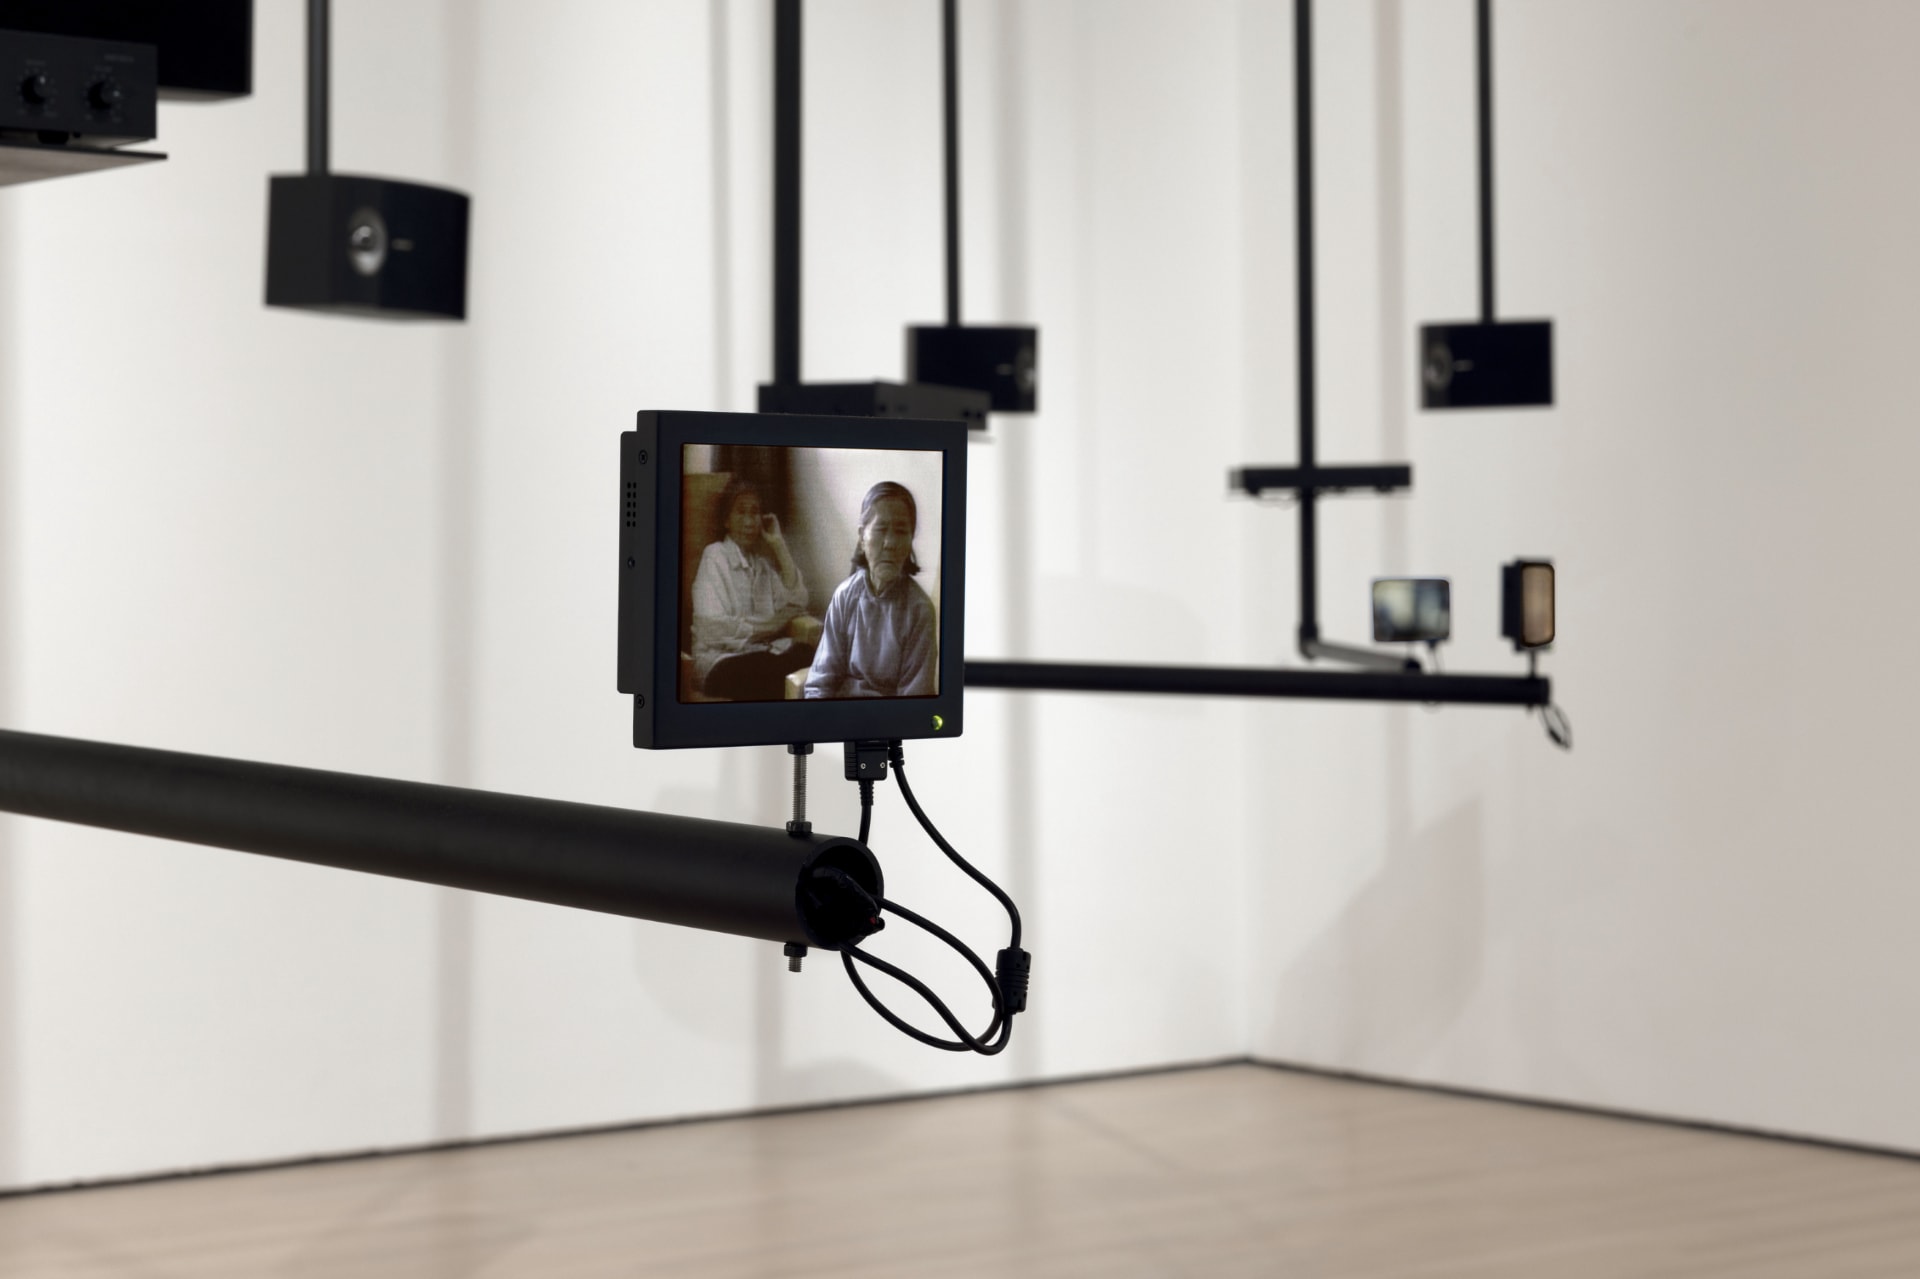 Installation by Dara Birnbaum with many small video screens